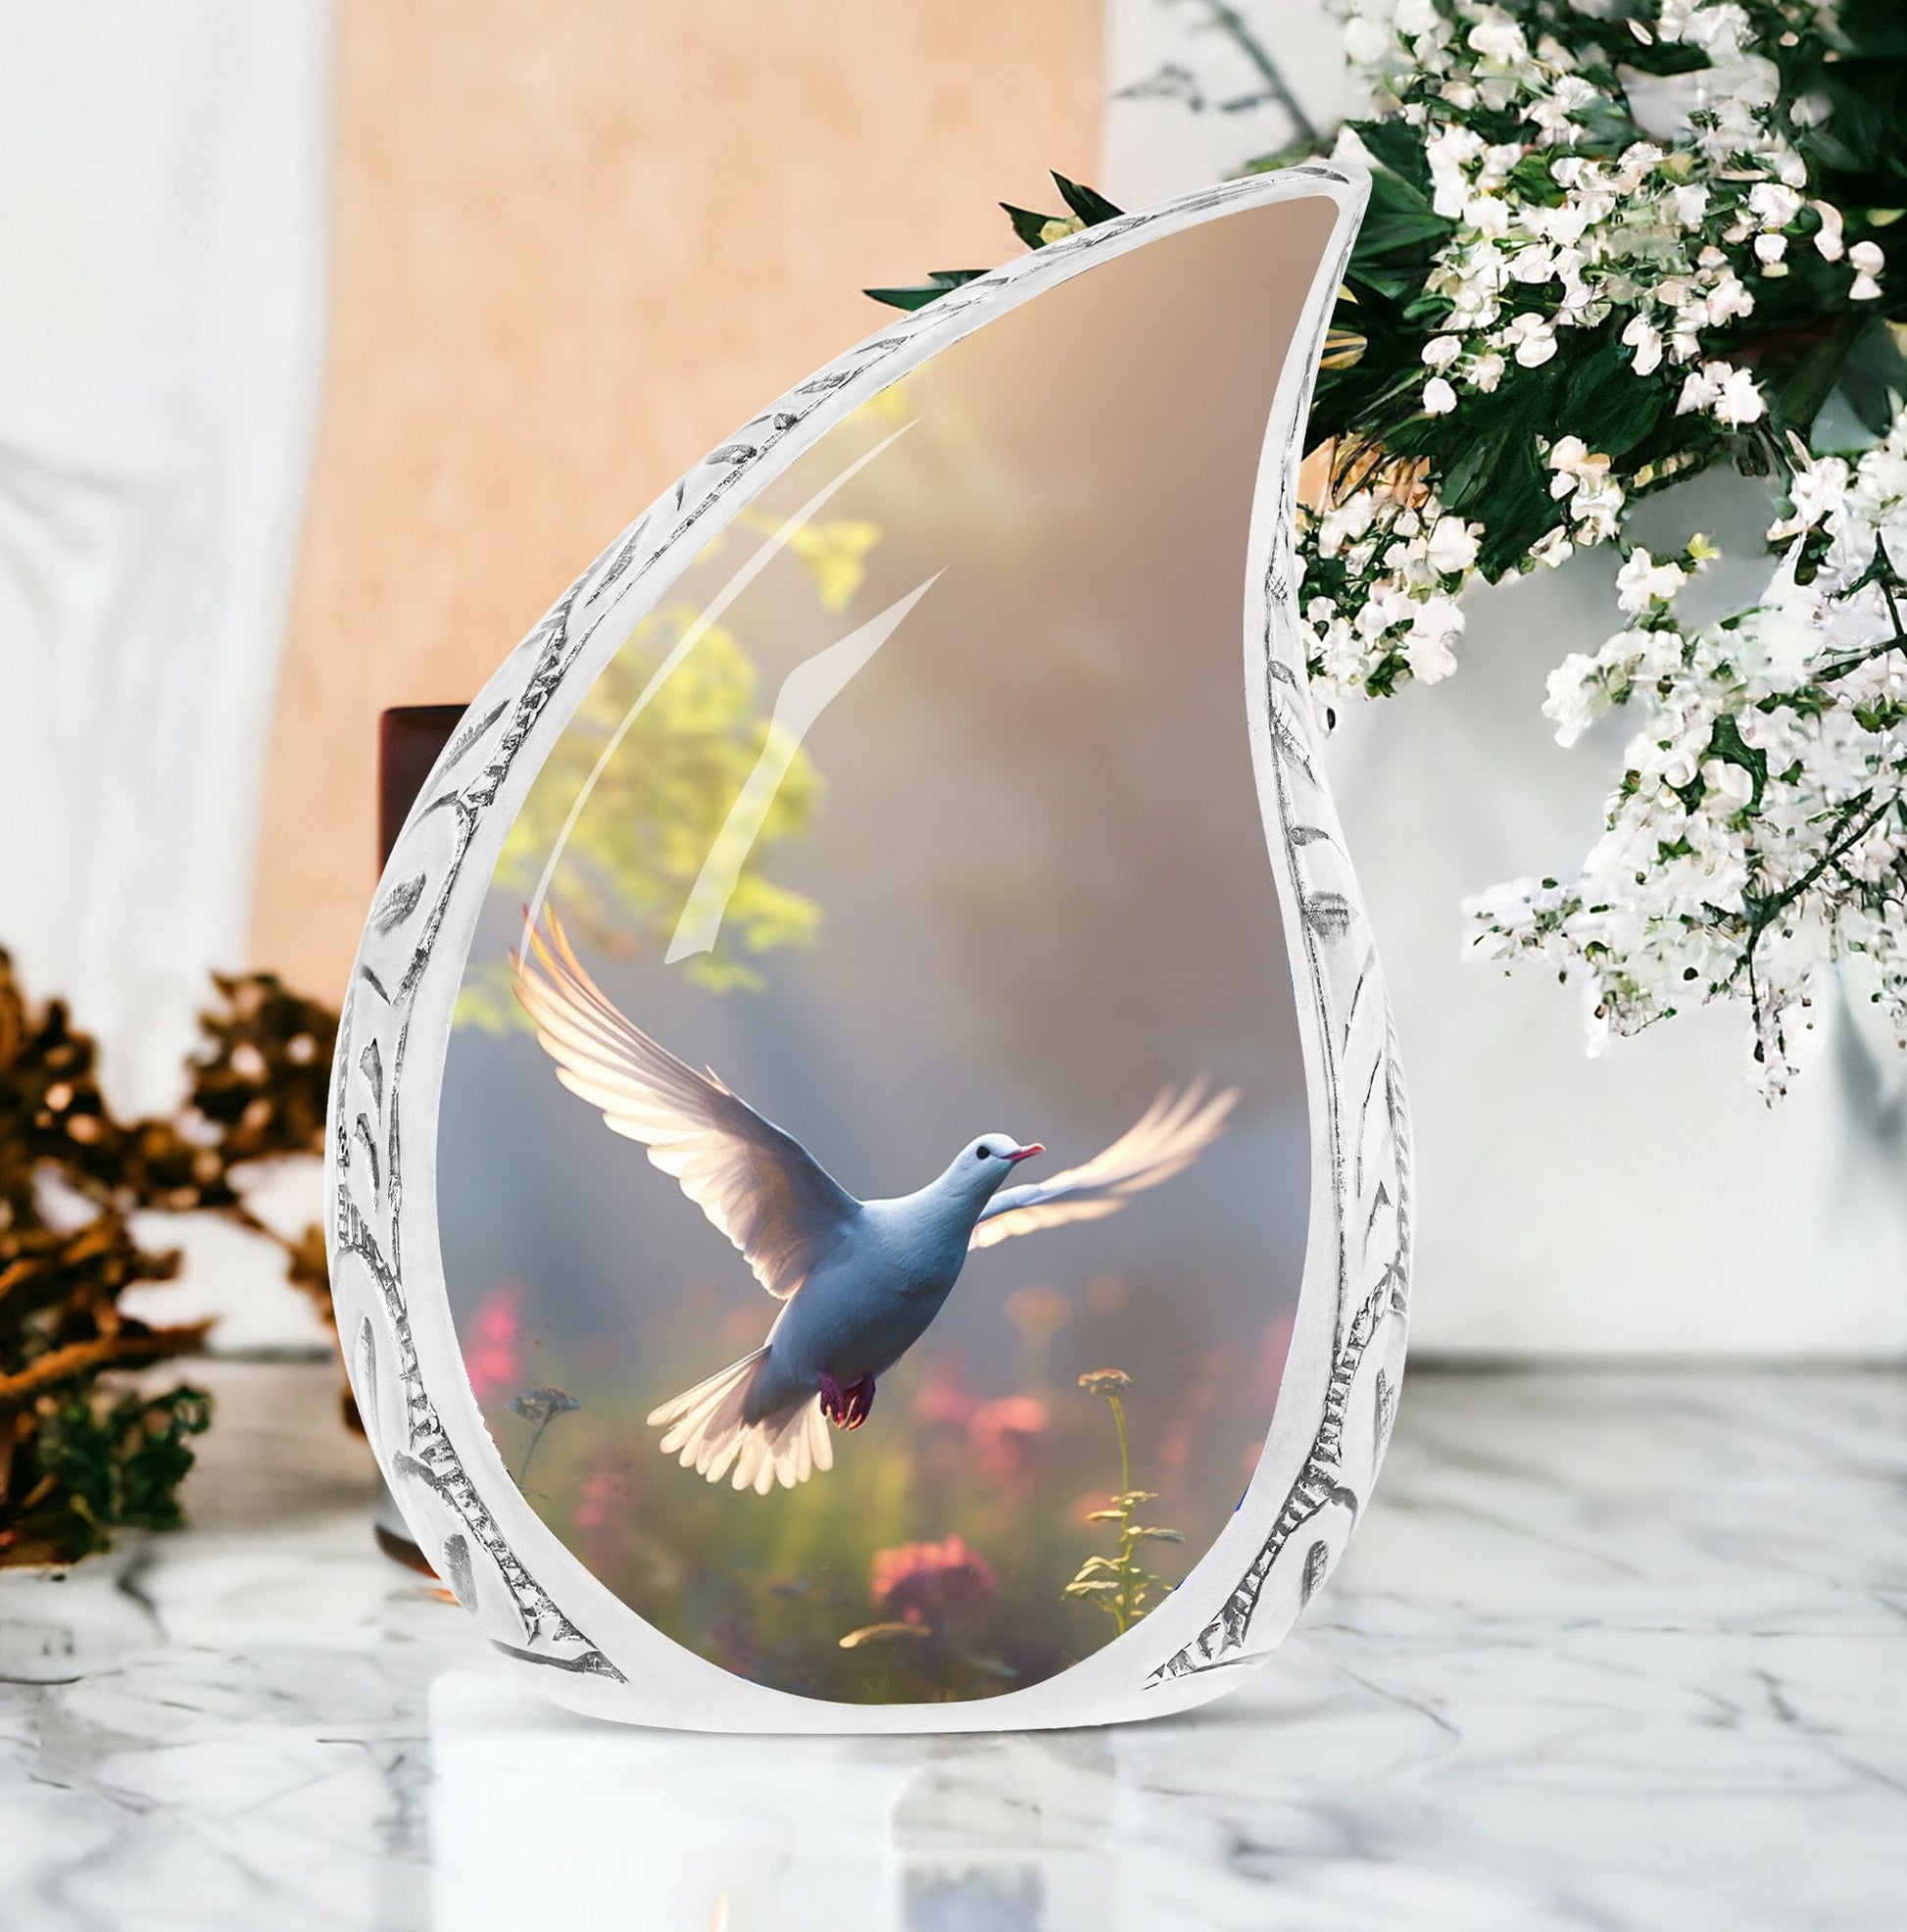 Large metal urn with depiction of a dove flying in morning light, used for containing ashes of adult male loved ones